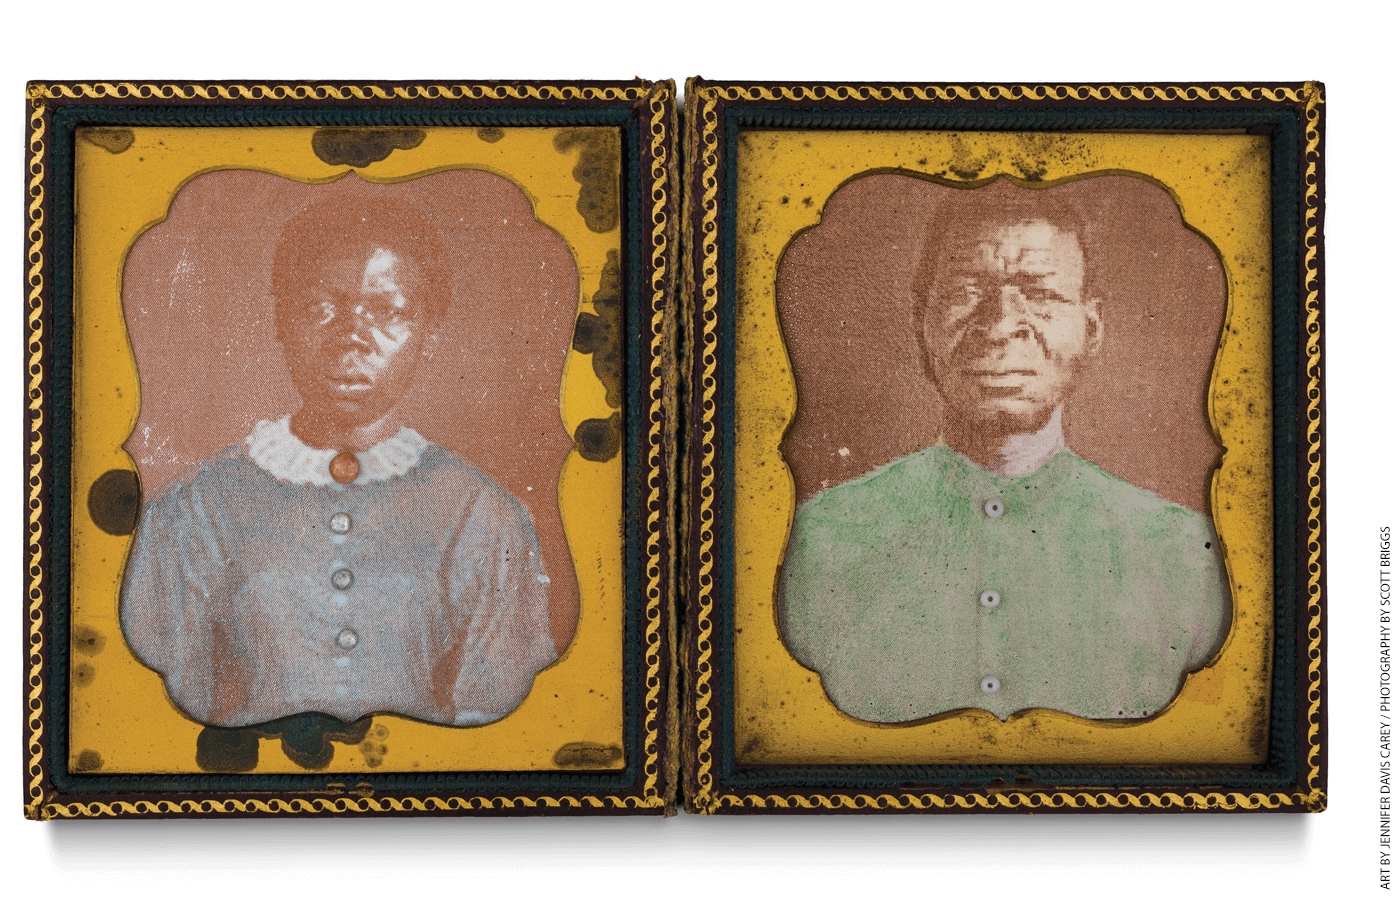 Drana and Jack. 

Learn more about this art: https://www.educationnext.org/teaching-about-slavery-forum-guelzo-berry-blight-rowe-stang-allen-maranto/#art